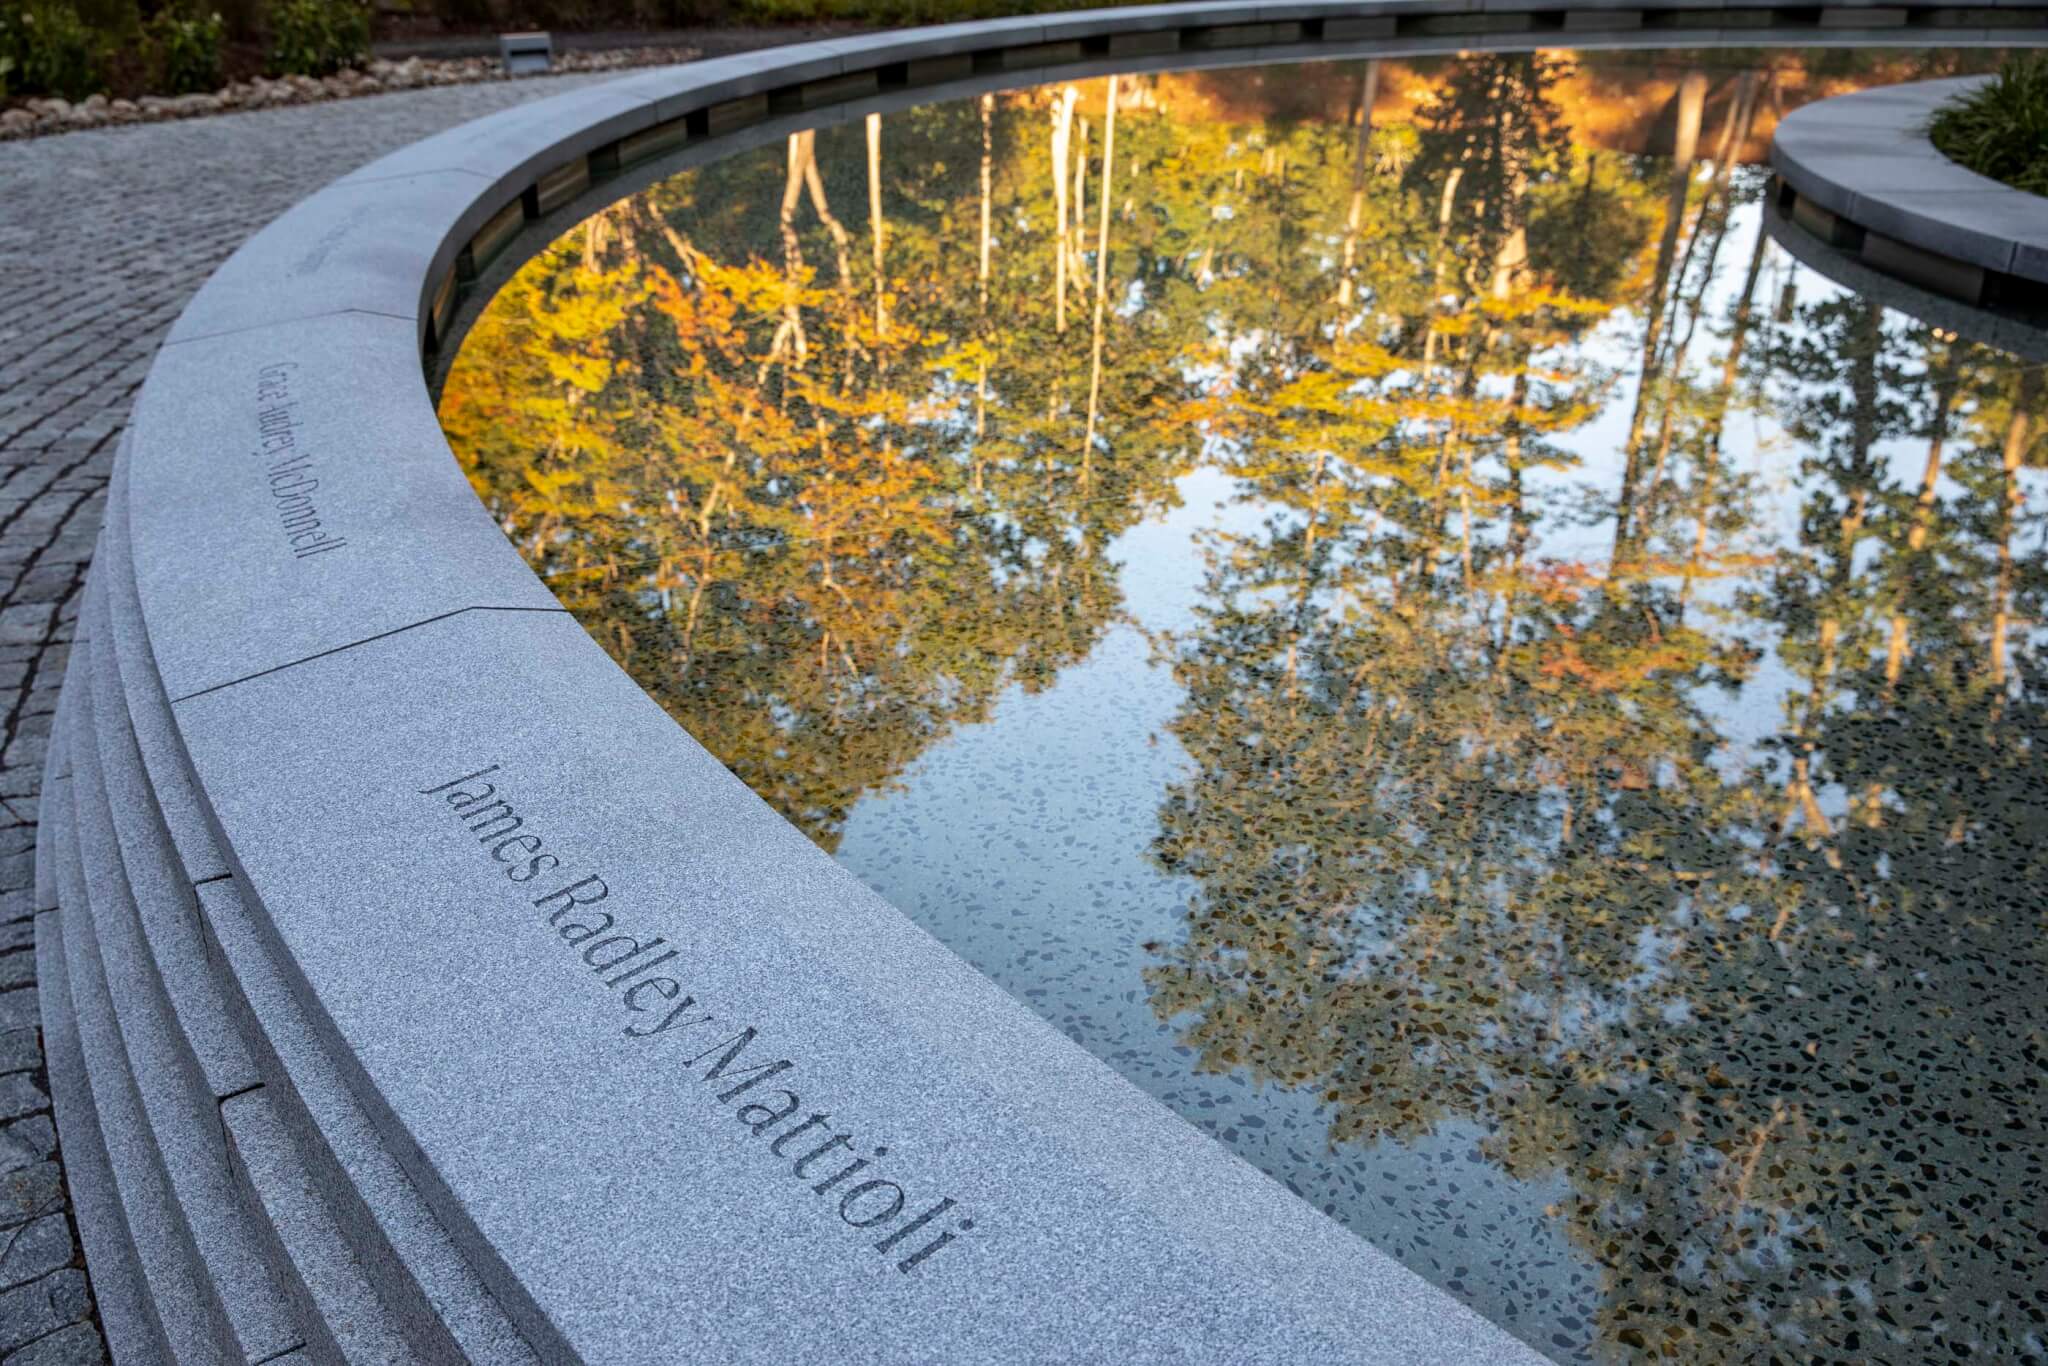 Names of gun violence victims carved into a granite landscape wall